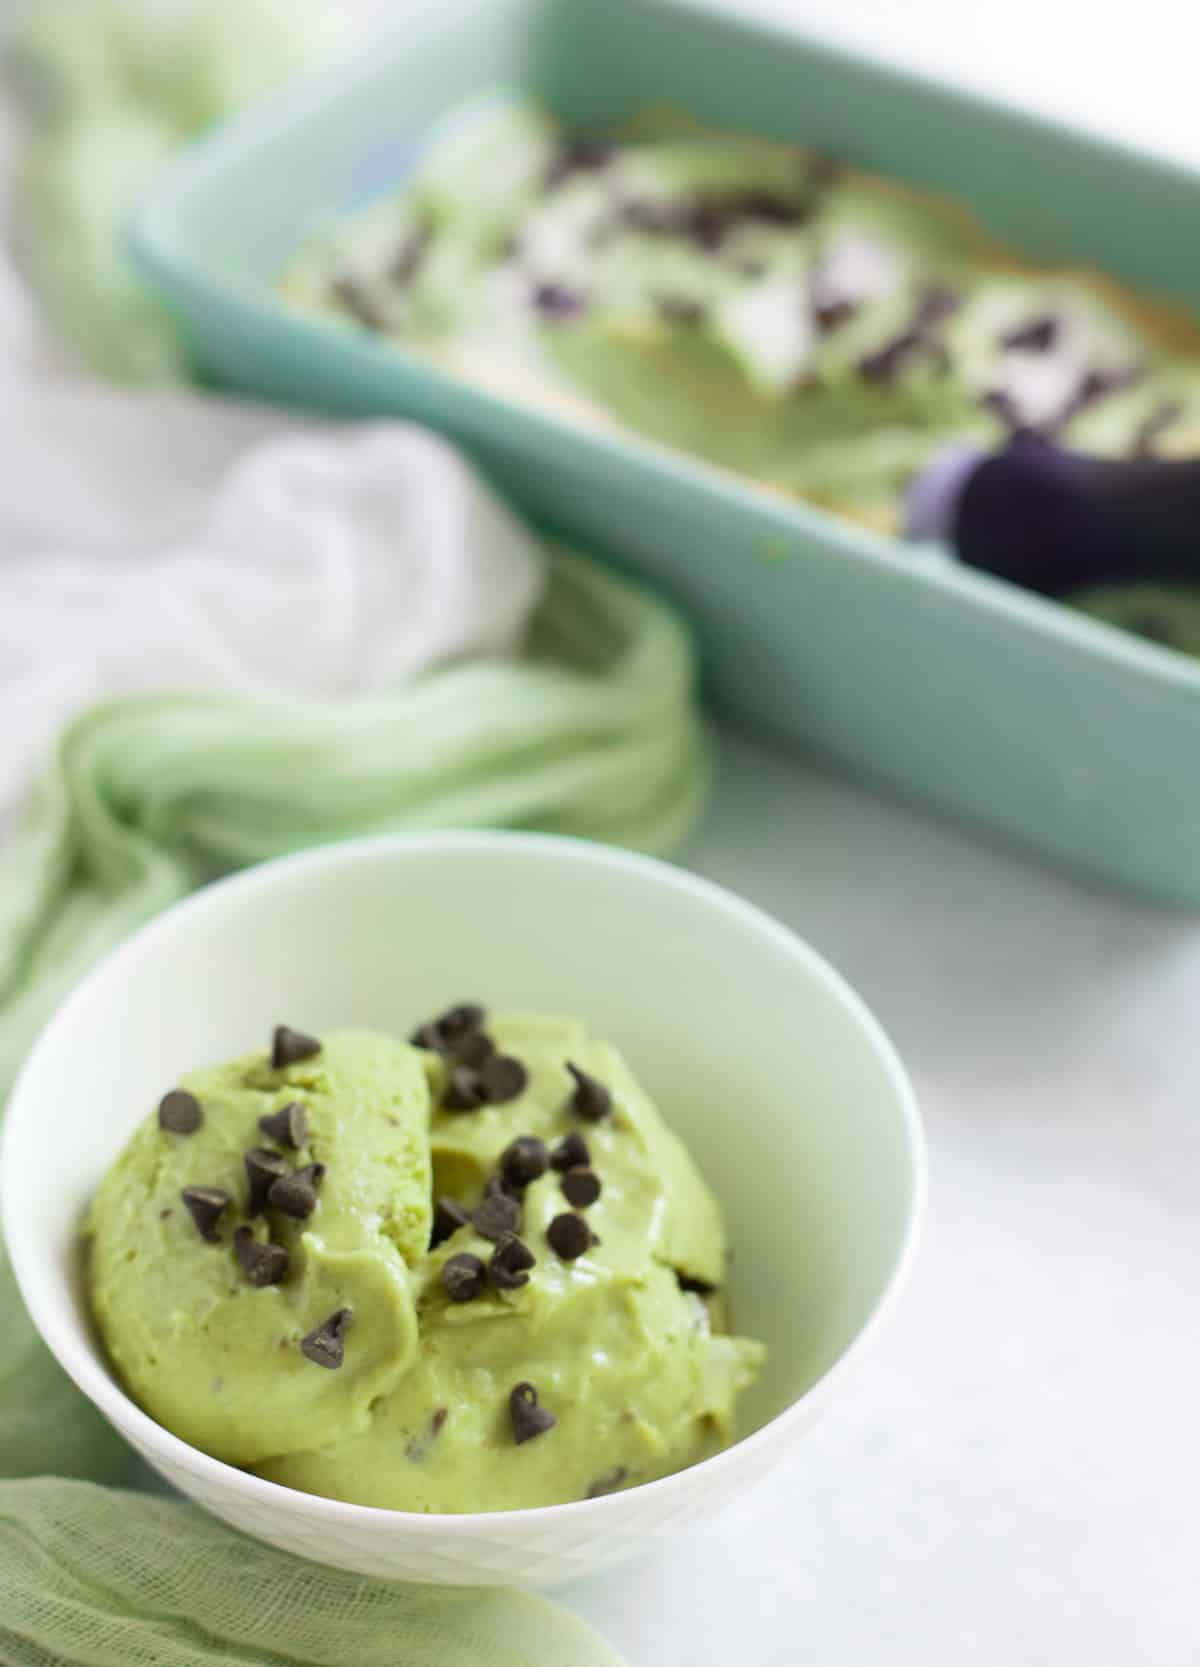 Green mint and avocado nice cream in white bowl topped with mini chocolate chips.
